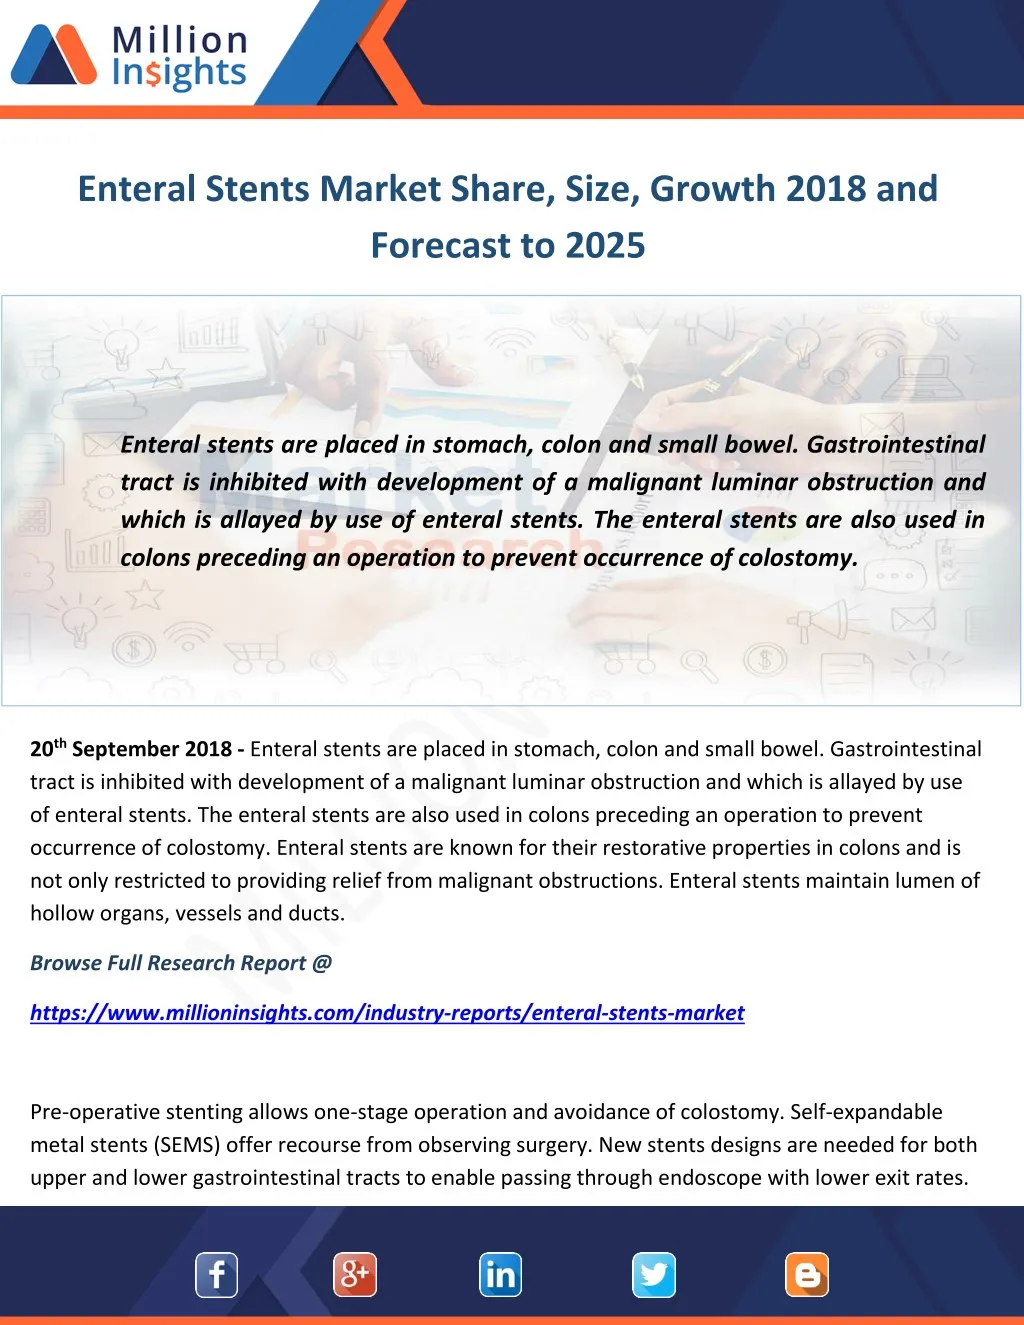 enteral stents market share size growth 2018